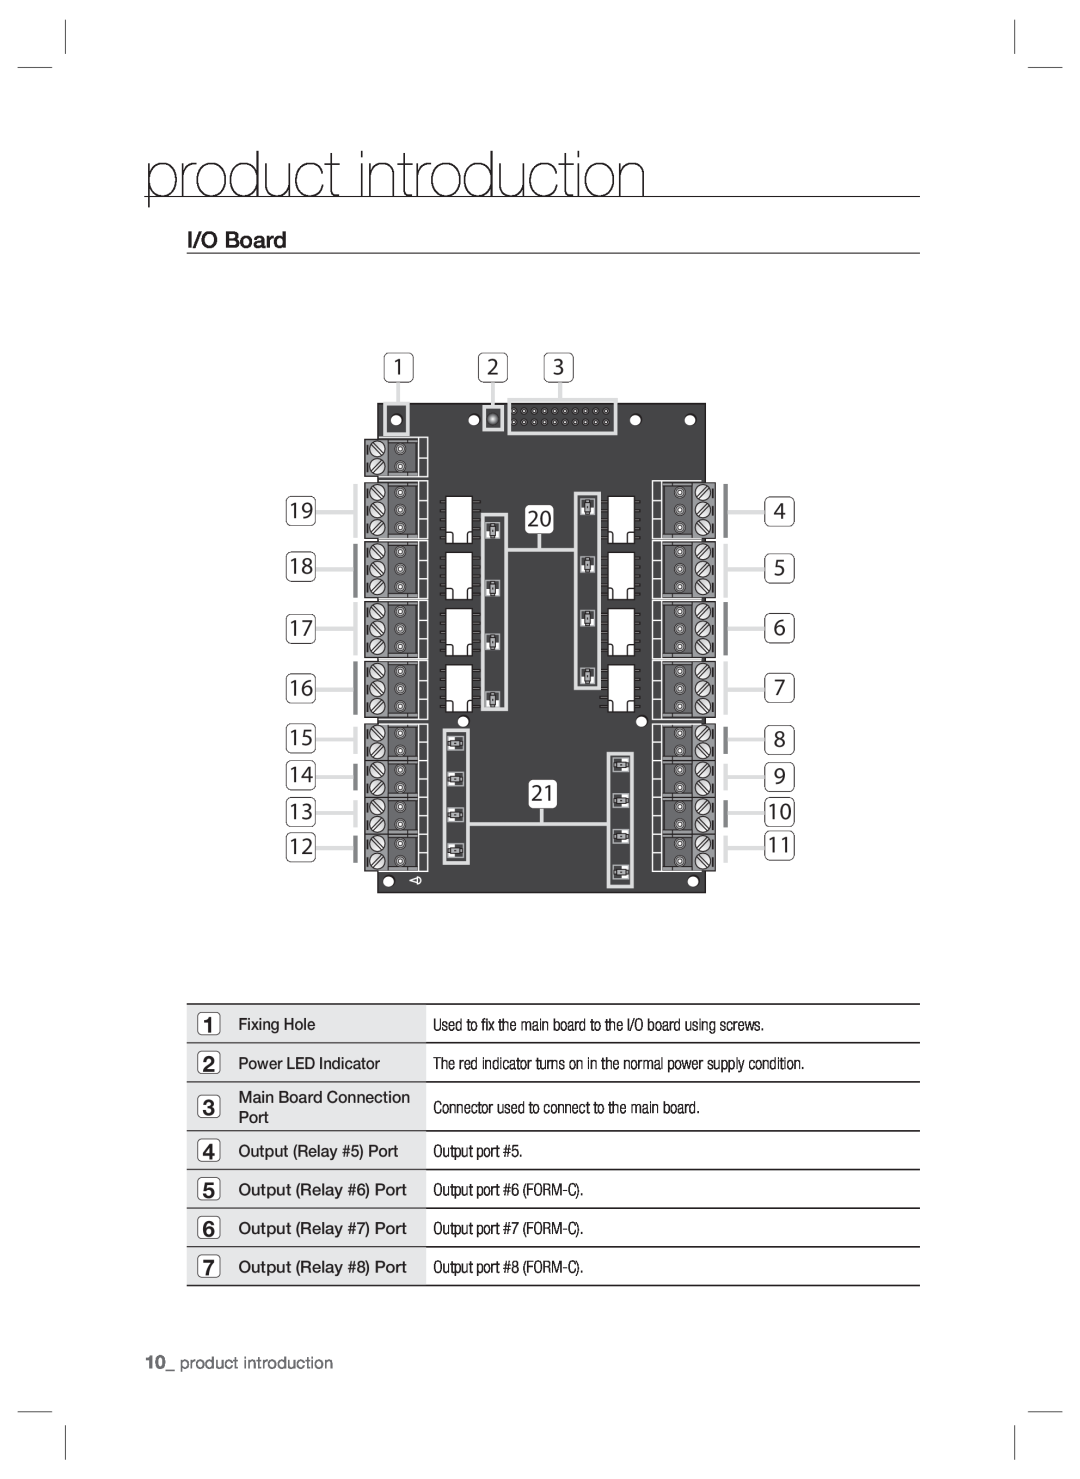 Samsung SSA-P400T, SSA-P401T user manual 19 18 17 16, I/O Board, product introduction 